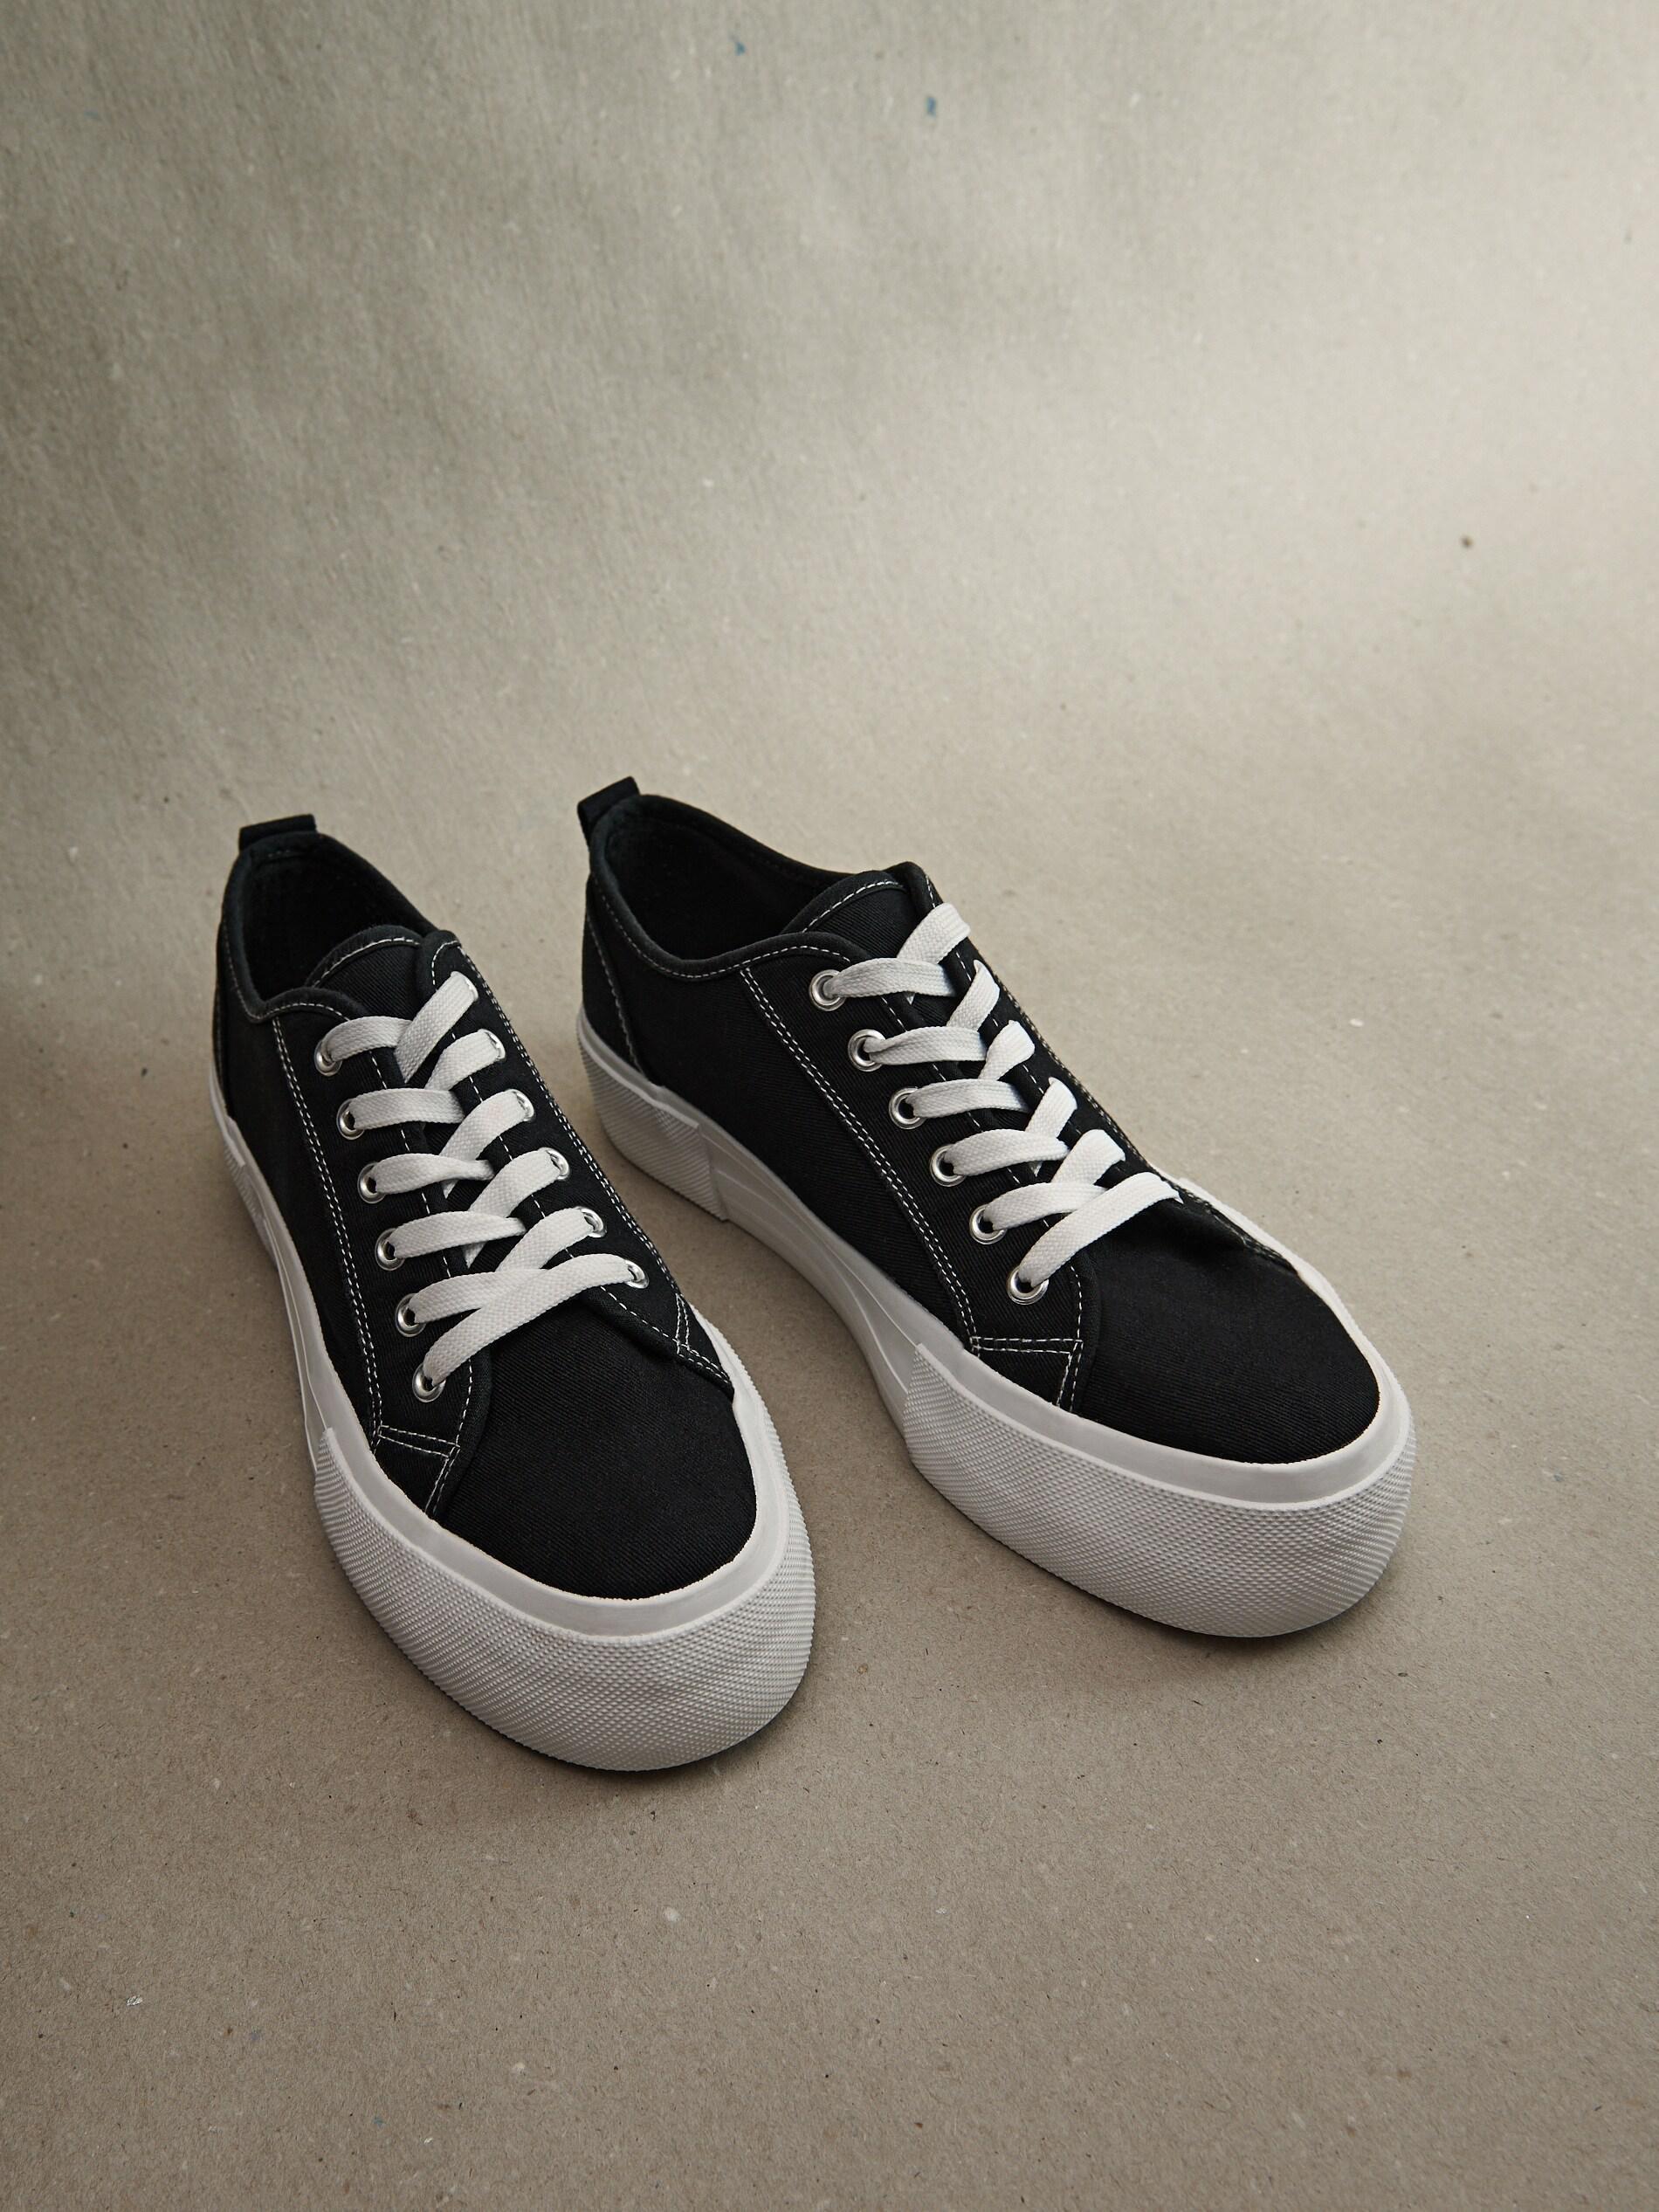 Reserved - Black Cotton Sneakers